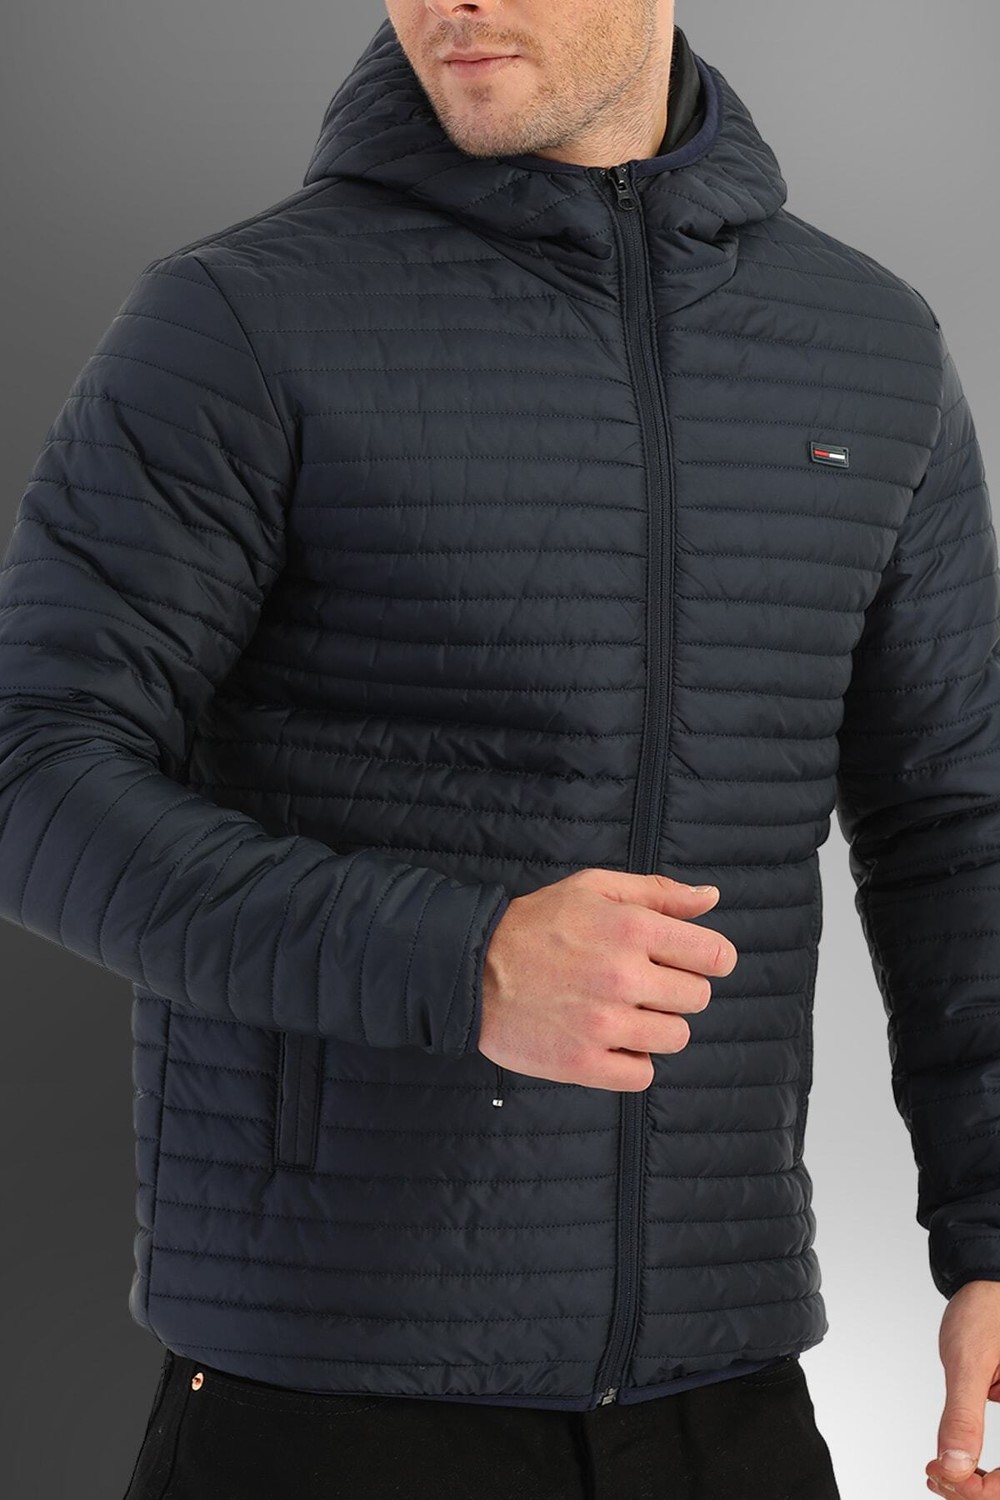 D1fference Men's Navy Blue Hooded Winter Coat With Inner Lined Waterproof And Windproof.